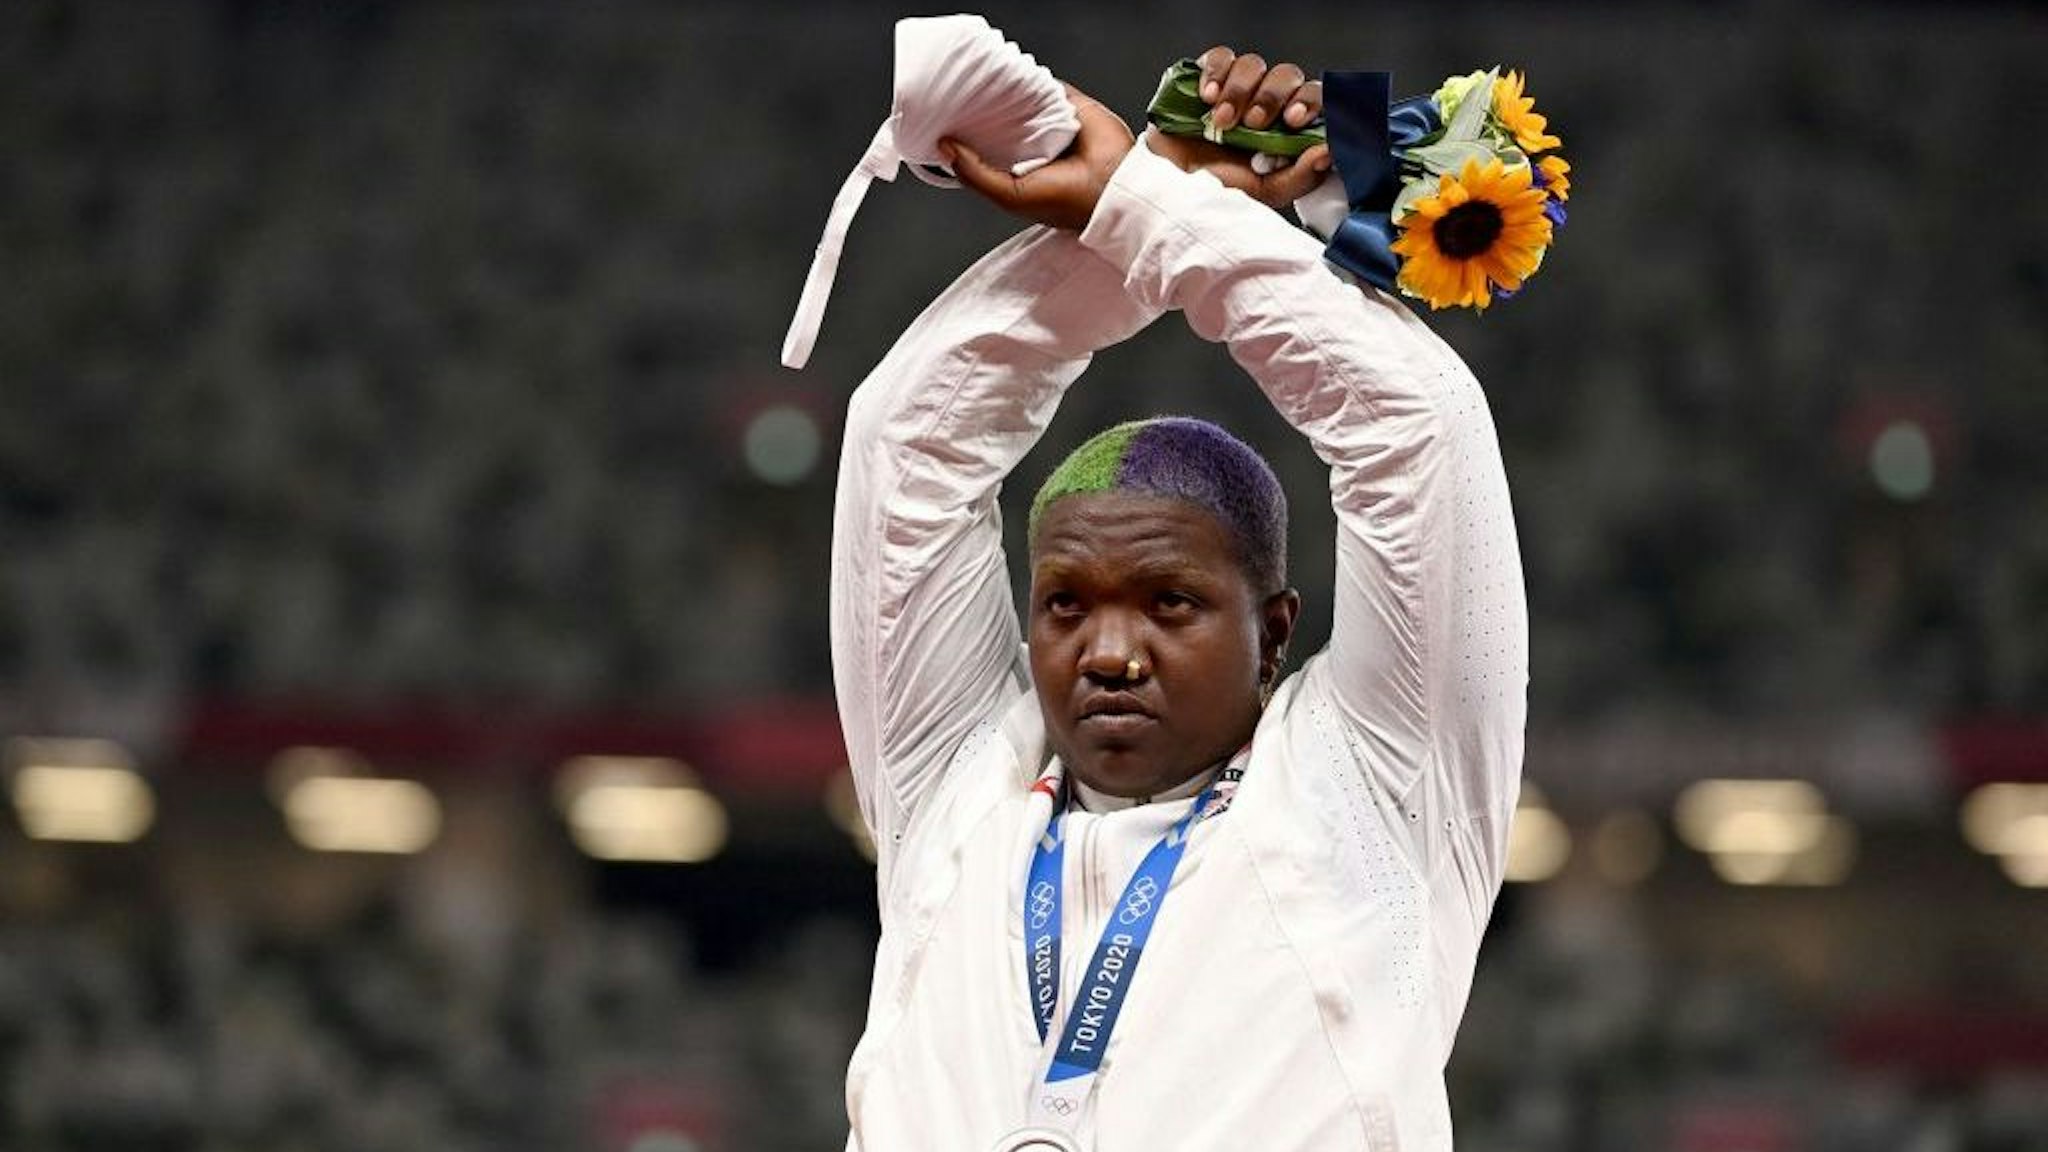 TOPSHOT - Second-placed USA's Raven Saunders gestures on the podium with her silver medal after competing the women's shot put event during the Tokyo 2020 Olympic Games at the Olympic Stadium in Tokyo on August 1, 2021. (Photo by Ina FASSBENDER / AFP) (Photo by INA FASSBENDER/AFP via Getty Images)